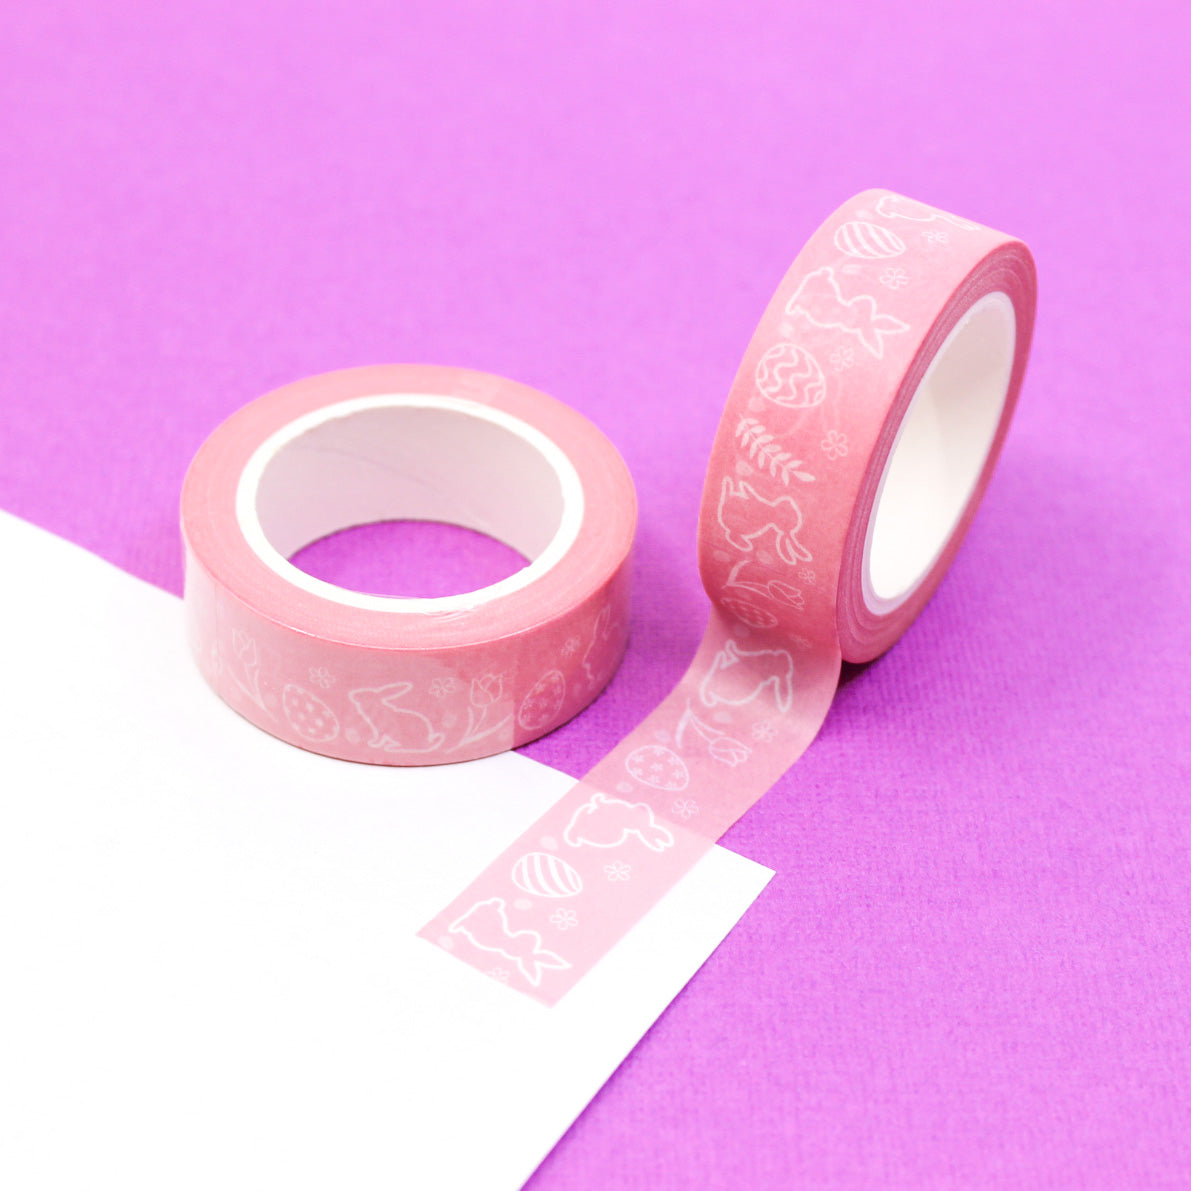 This charming tape features playful bunnies and colorful Easter eggs on a pink background, adding a delightful touch to your Easter crafts and decorations. Perfect for scrapbooking, card-making, and other creative projects. This tape is sold at BBB Supplies Craft Shop.